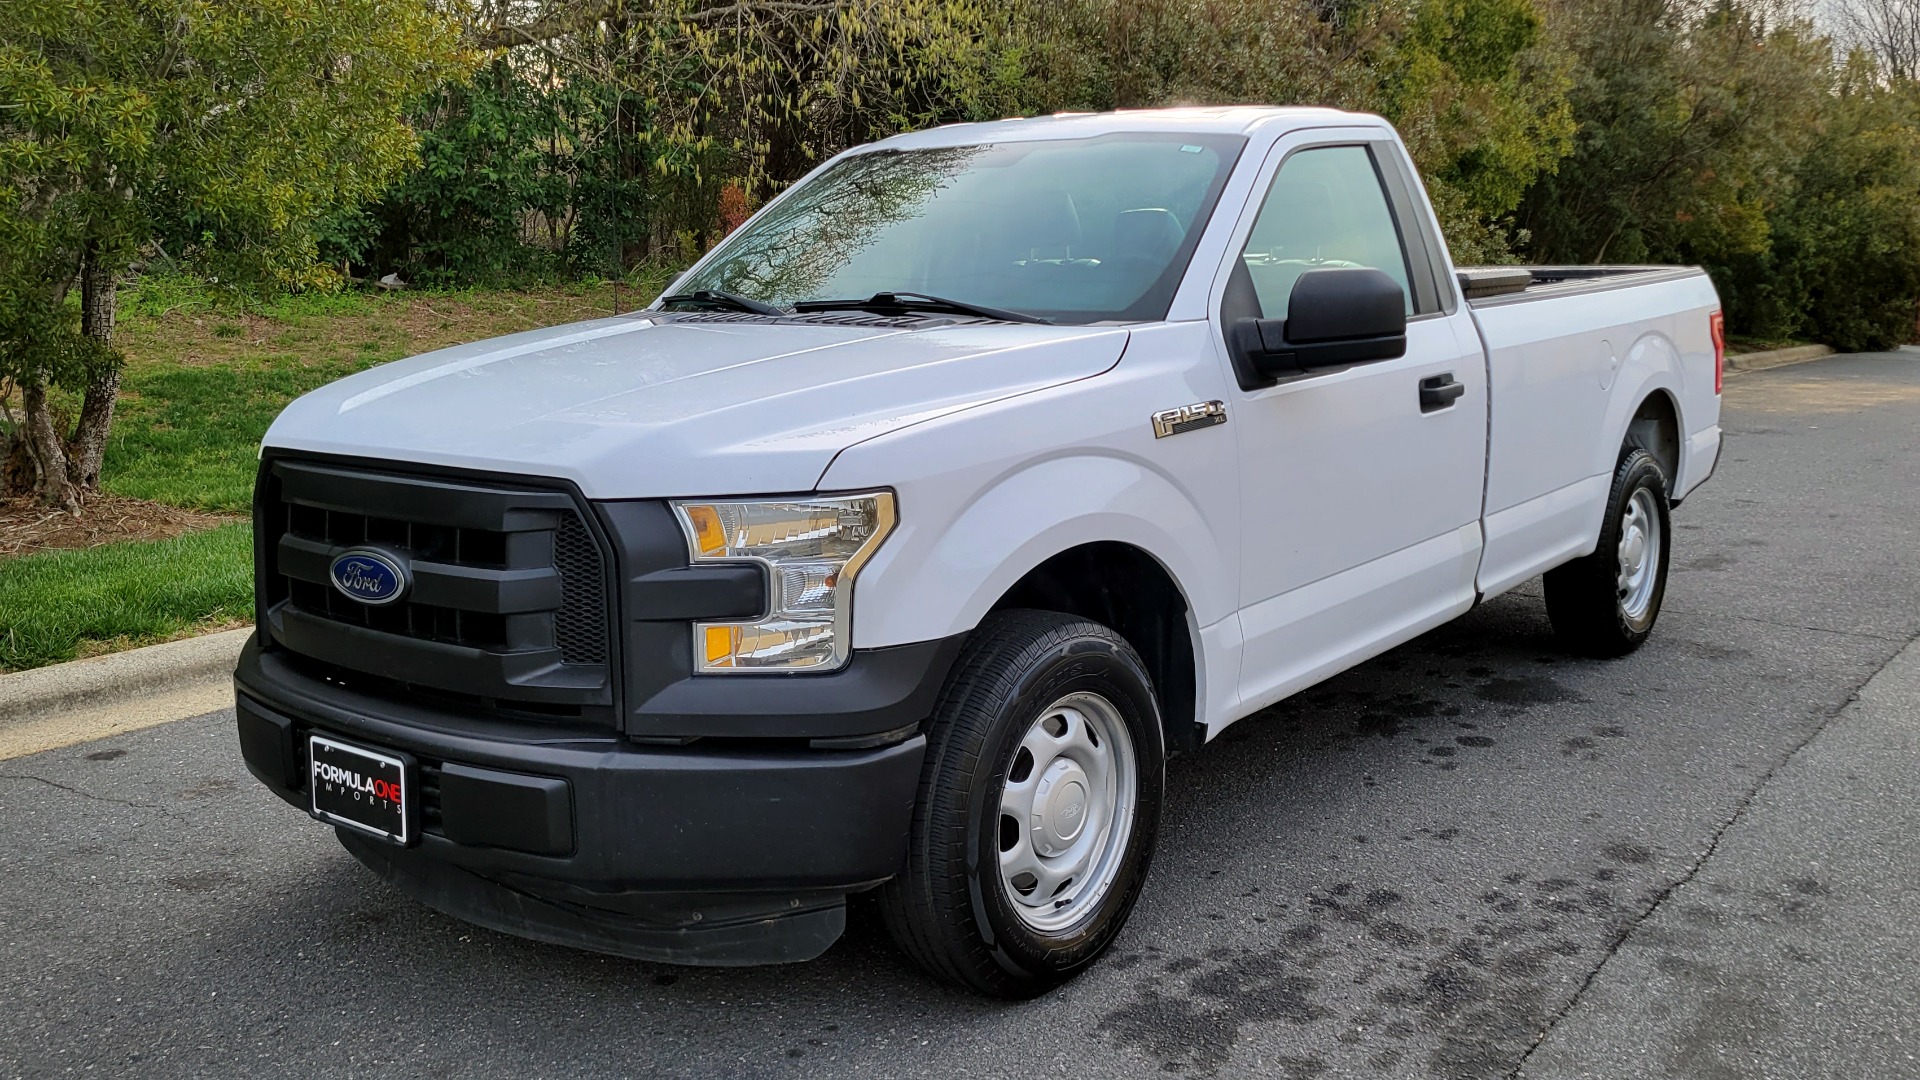 Used 2016 Ford F-150 XL REGULAR CAB 4X2 / 3.5L V6 / 6-SPD AUTO / TOWING / TOOL BOX for sale $13,499 at Formula Imports in Charlotte NC 28227 1